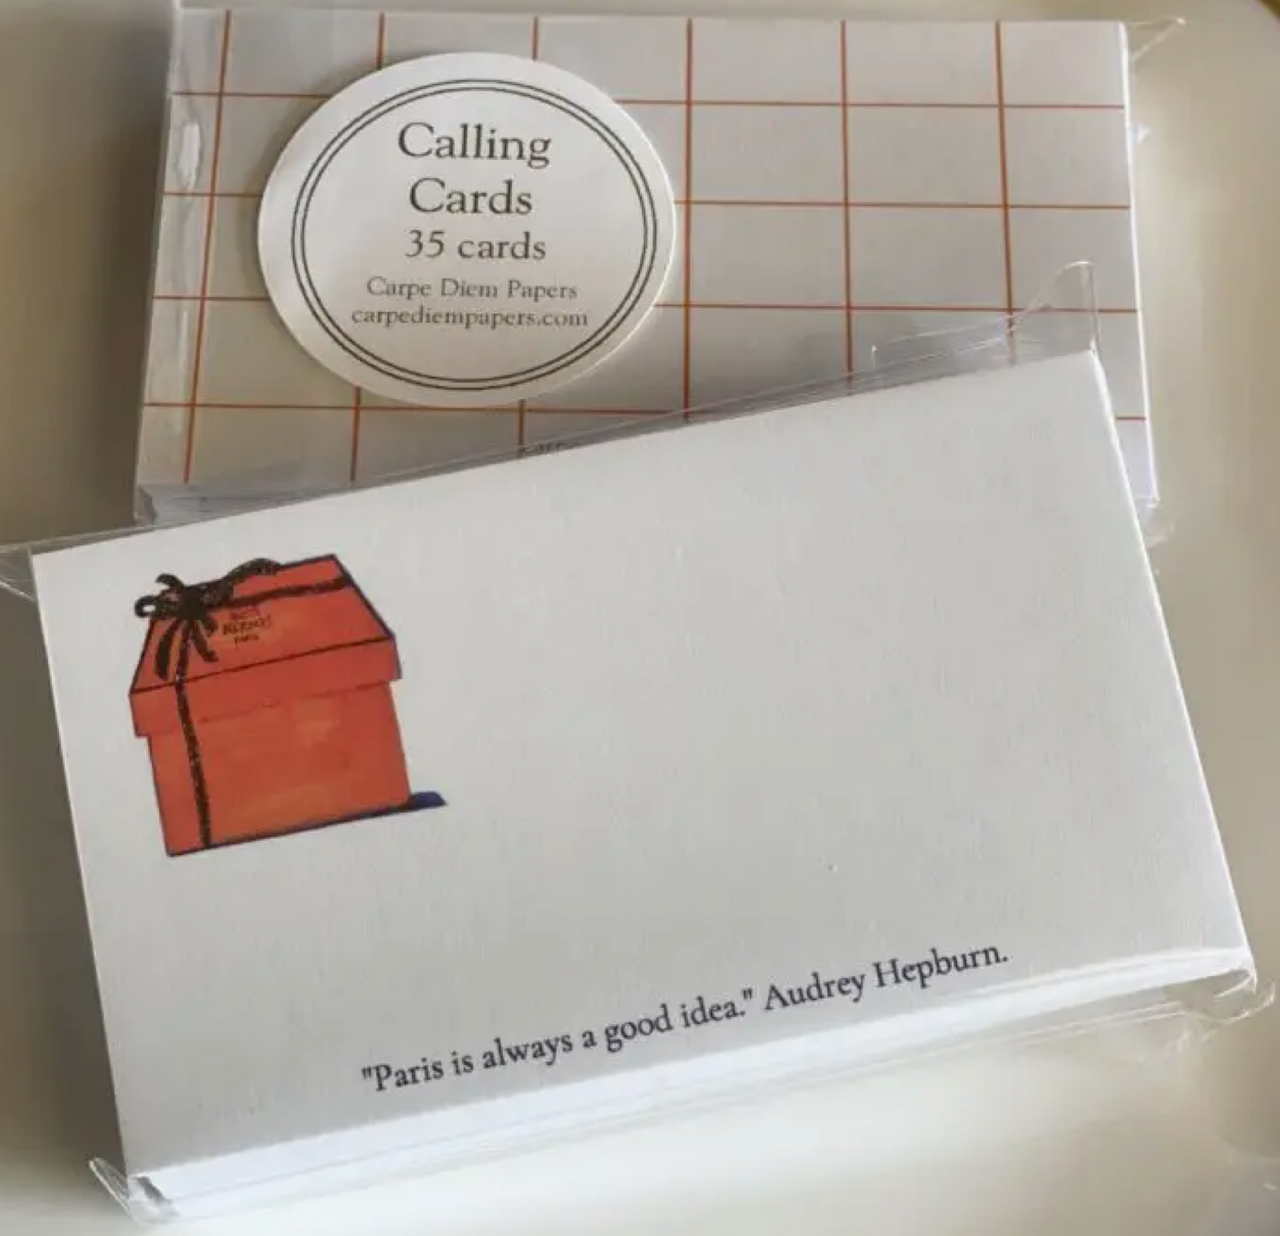 Hermes Box Calling Cards